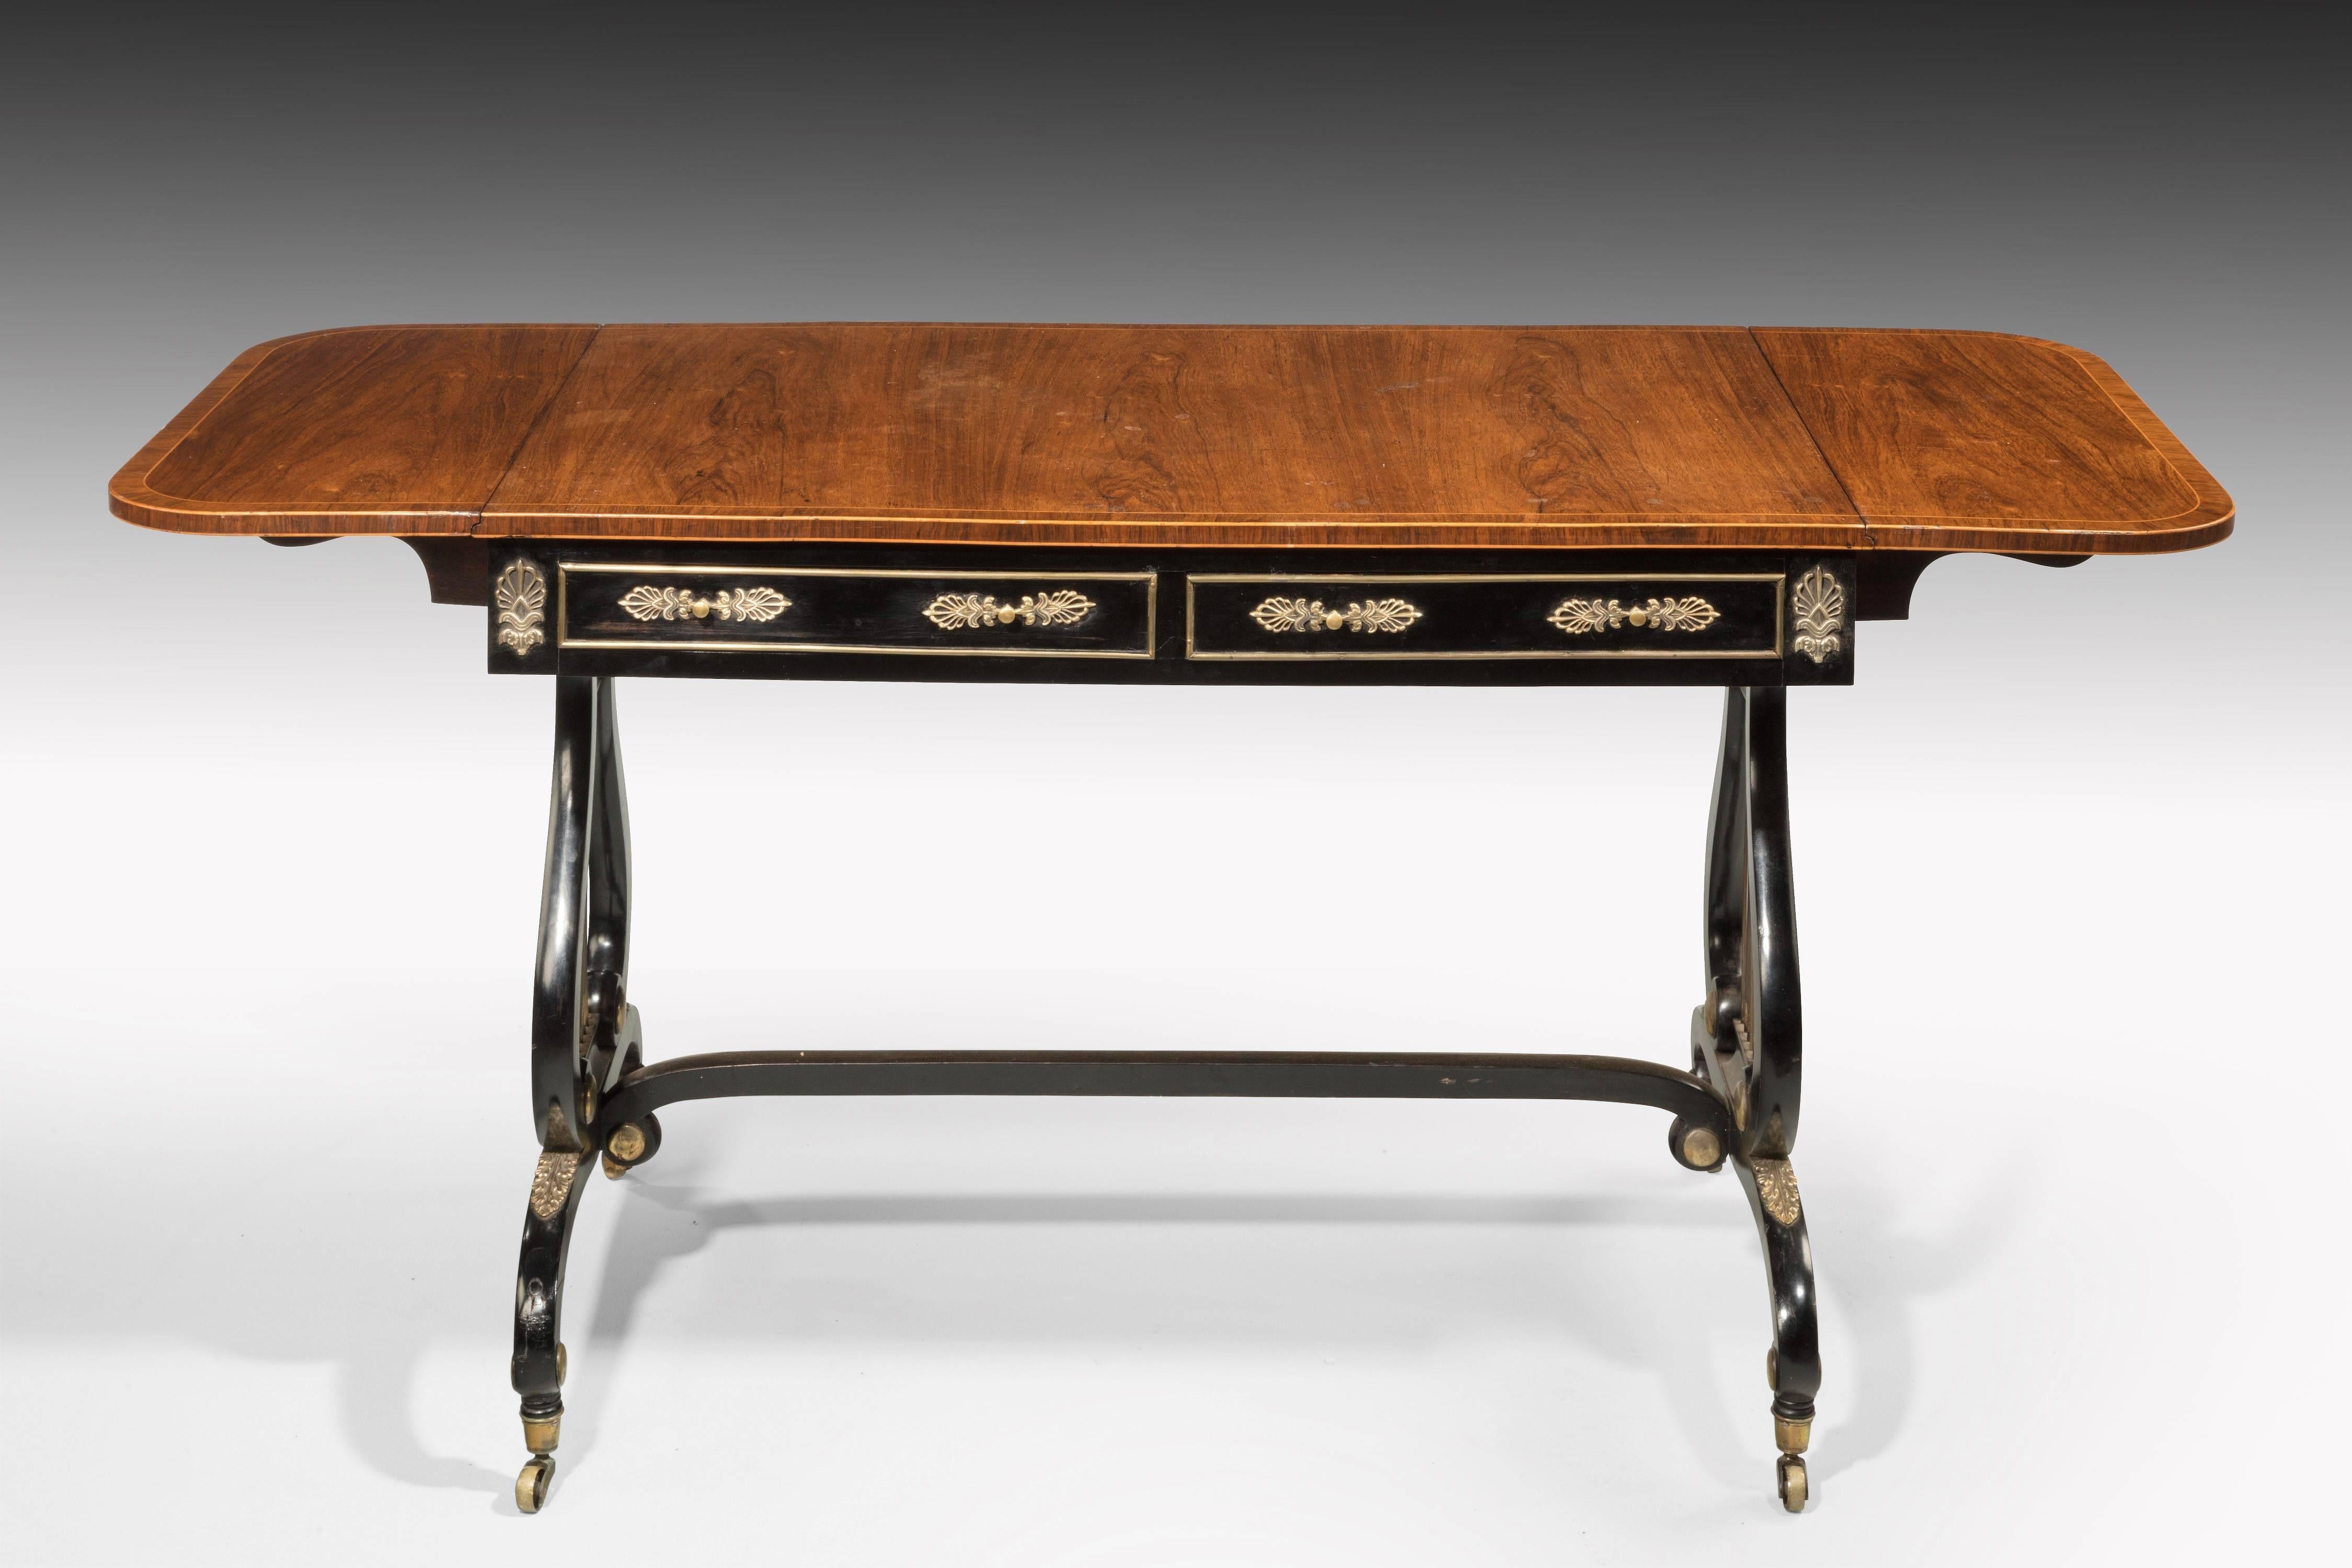 English Regency Period Rosewood Sofa Table of the Most Elegant Form